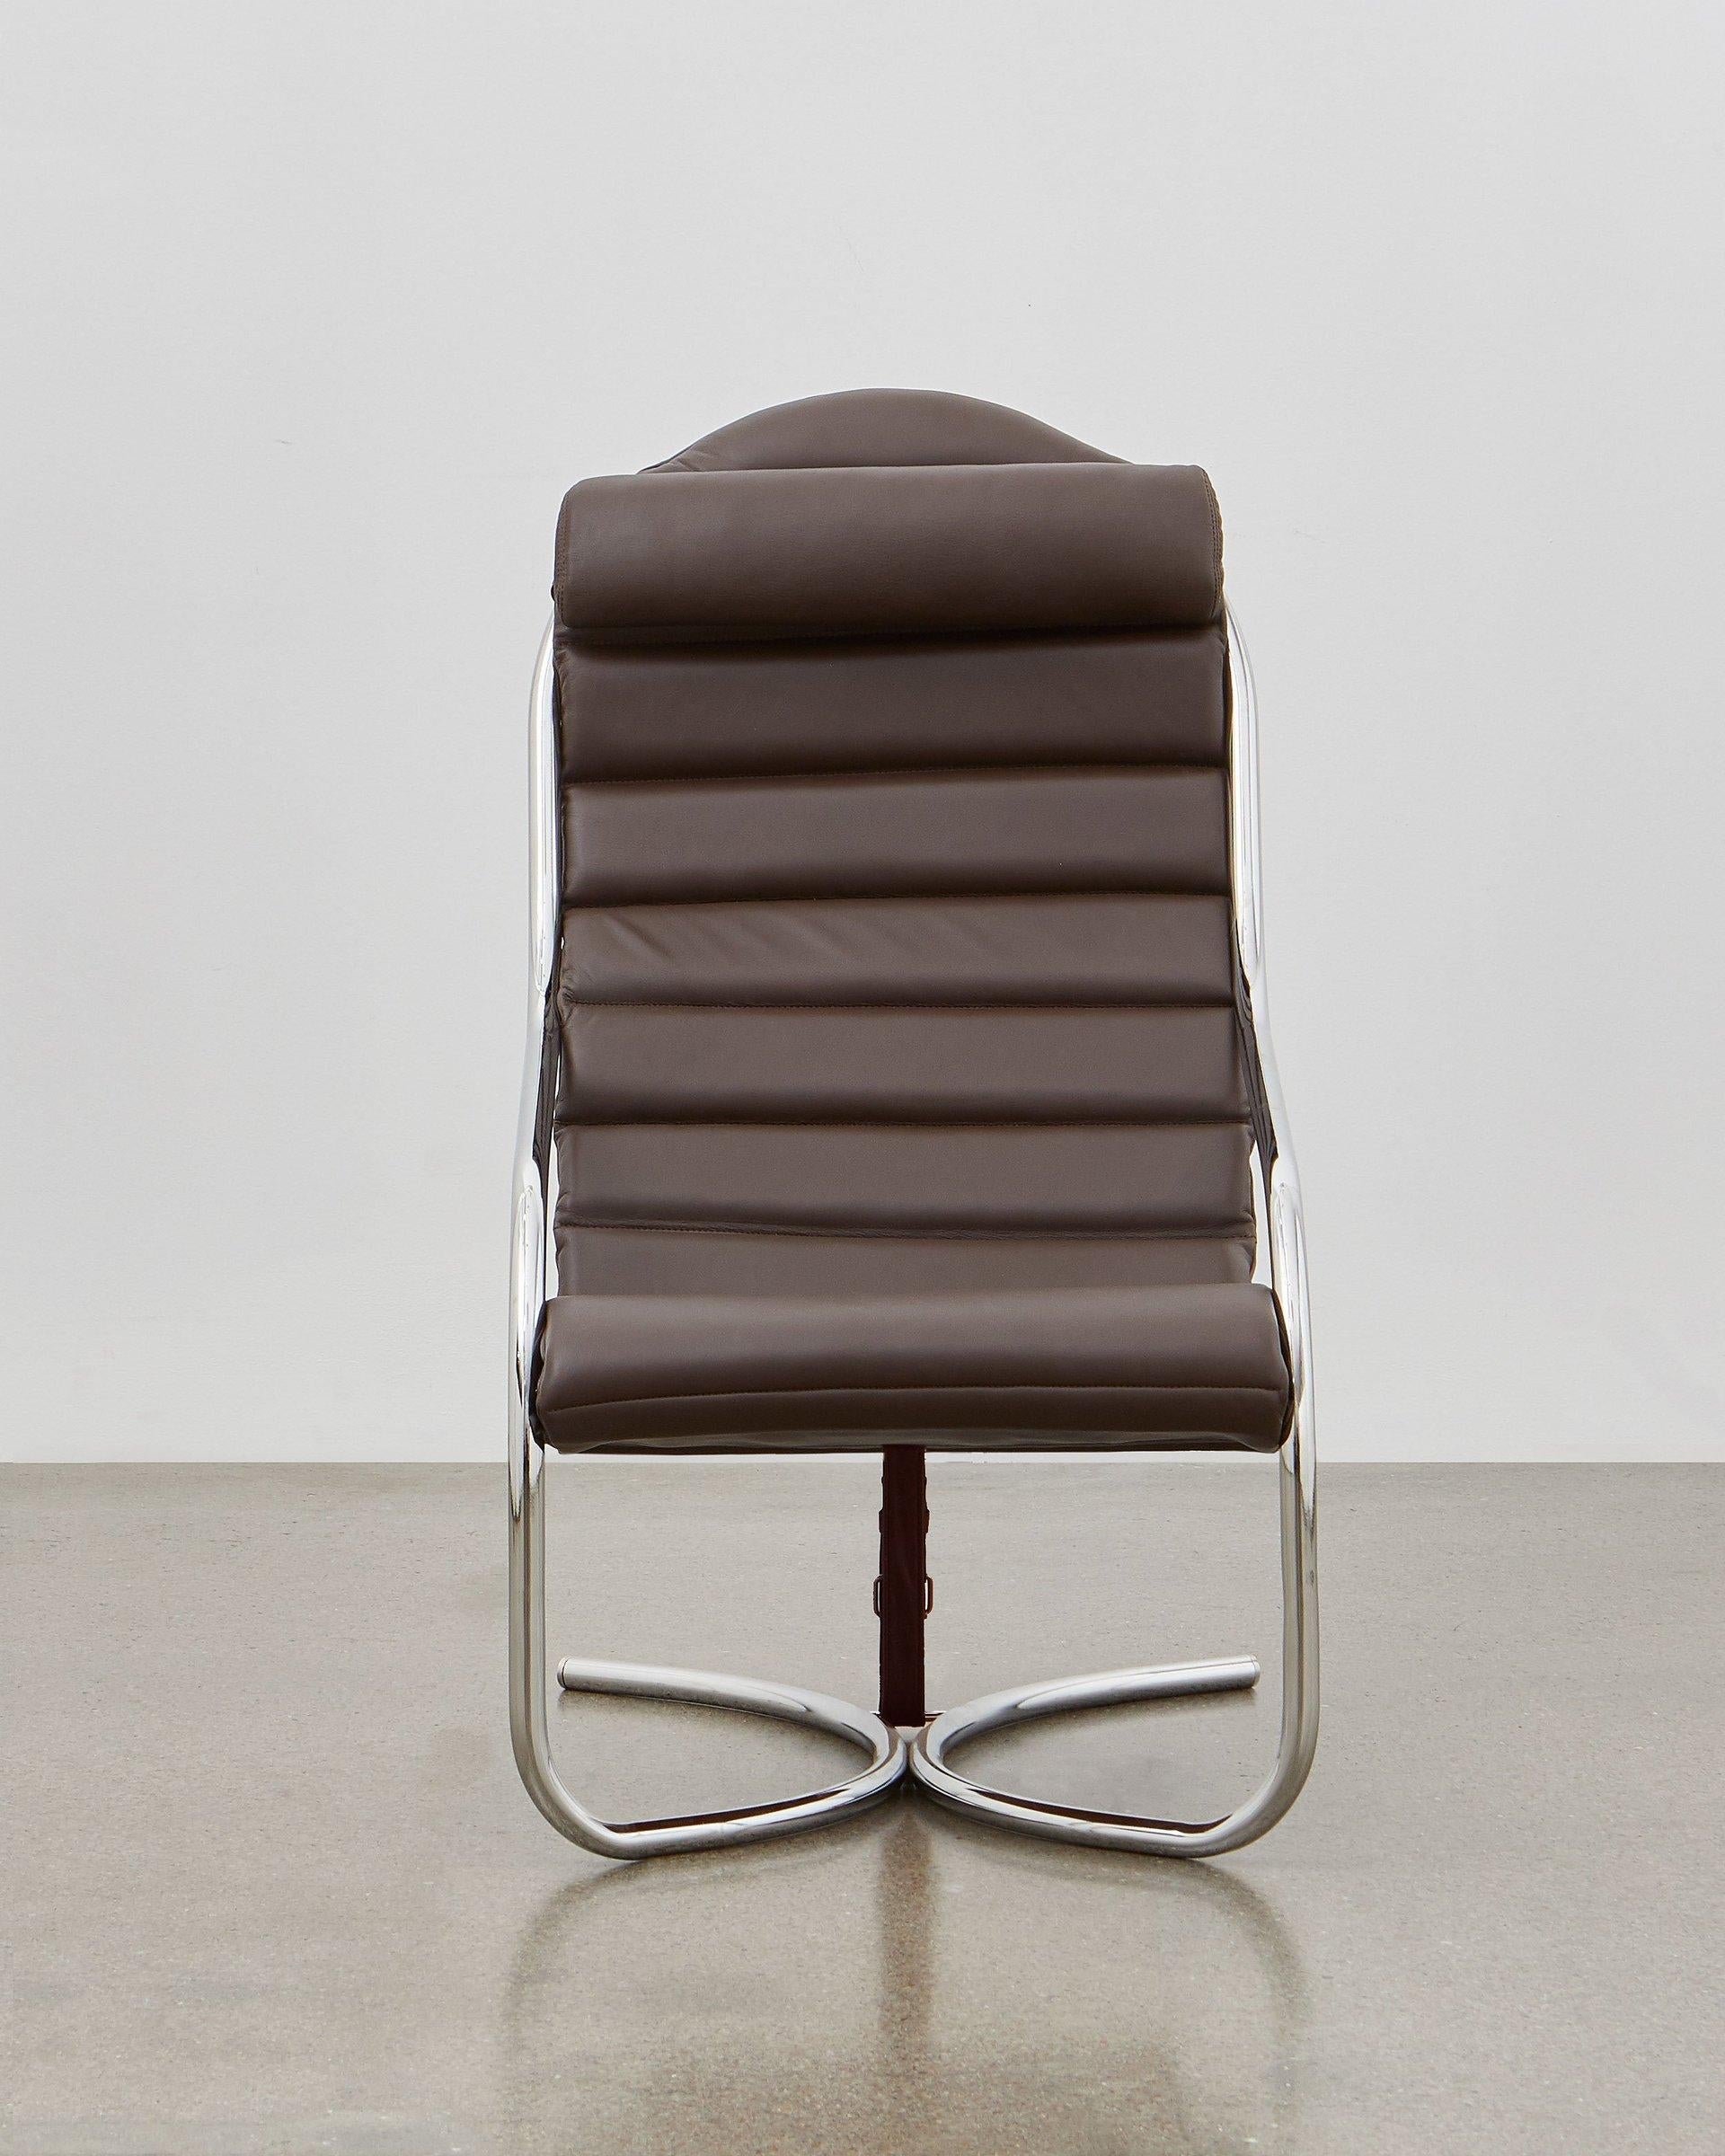 Take a deep breath and enjoy the moment! The PH Lounge Chair is a place to rest, to think and to relax. The frame of the PH Lounge Chair consists visually only of one long steel tube, bent in generous, dynamic lines for ultimate comfort. Where the